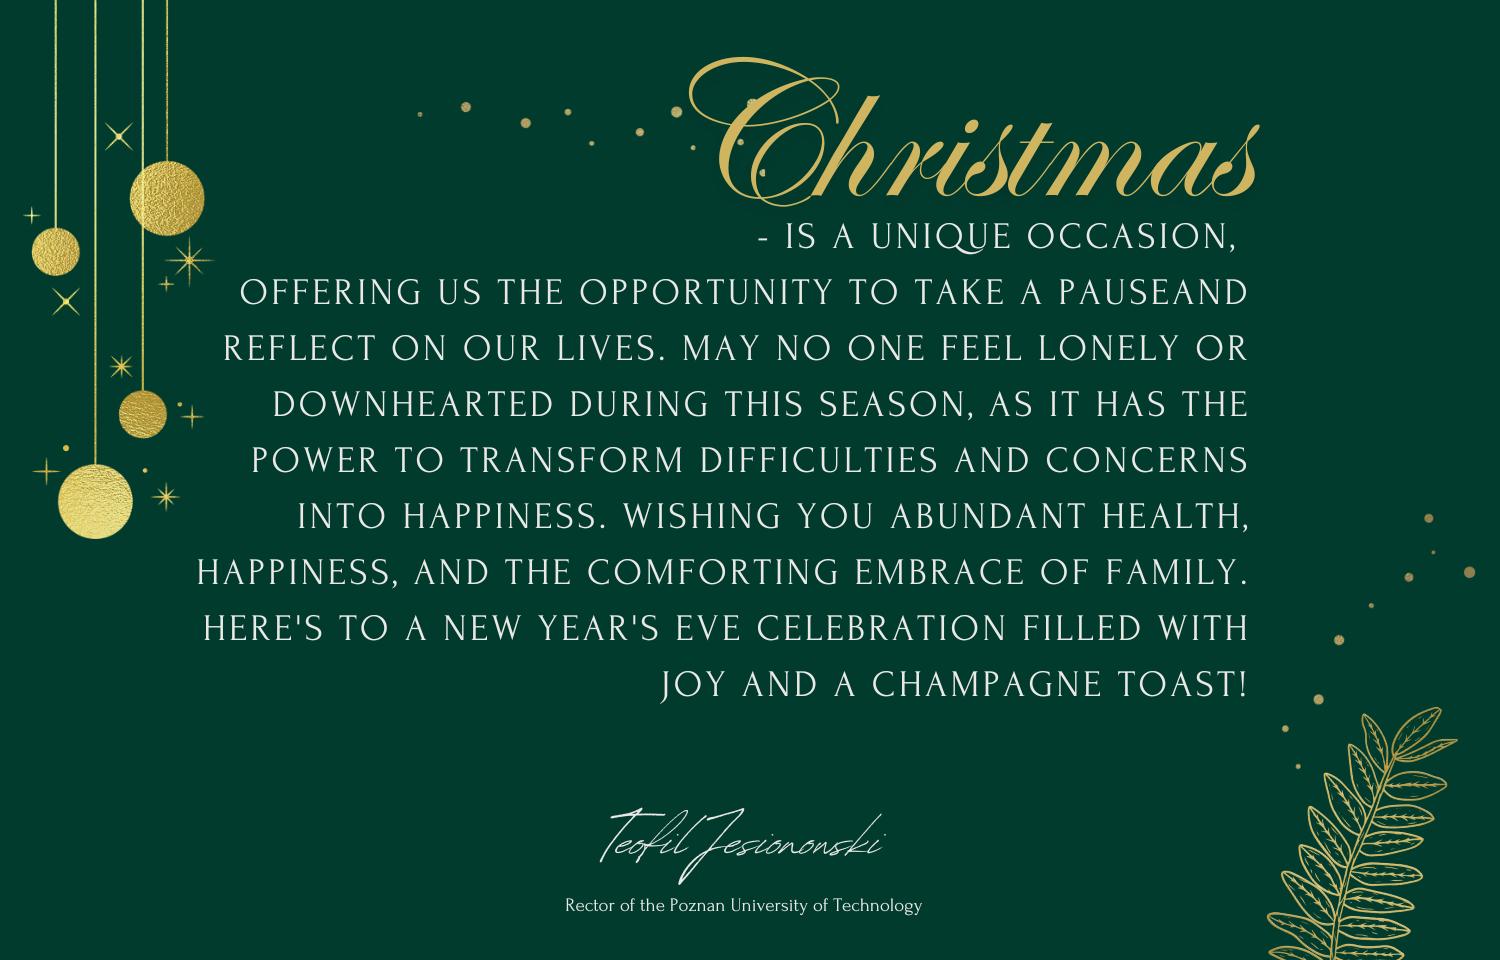 Christmas is a unique occasion, offering us the opportunity to take a pauseand reflect on our lives. May no one feel lonely or downhearted during this season,  as it has the power to transform difficulties and concerns into happiness. Wishing you abundant health, happiness, and the comforting embrace of family. Here's to a New Year's Eve celebration filled with joy and a champagne toast!  Teofil Jesionowski Rector of the Poznan University of Technology